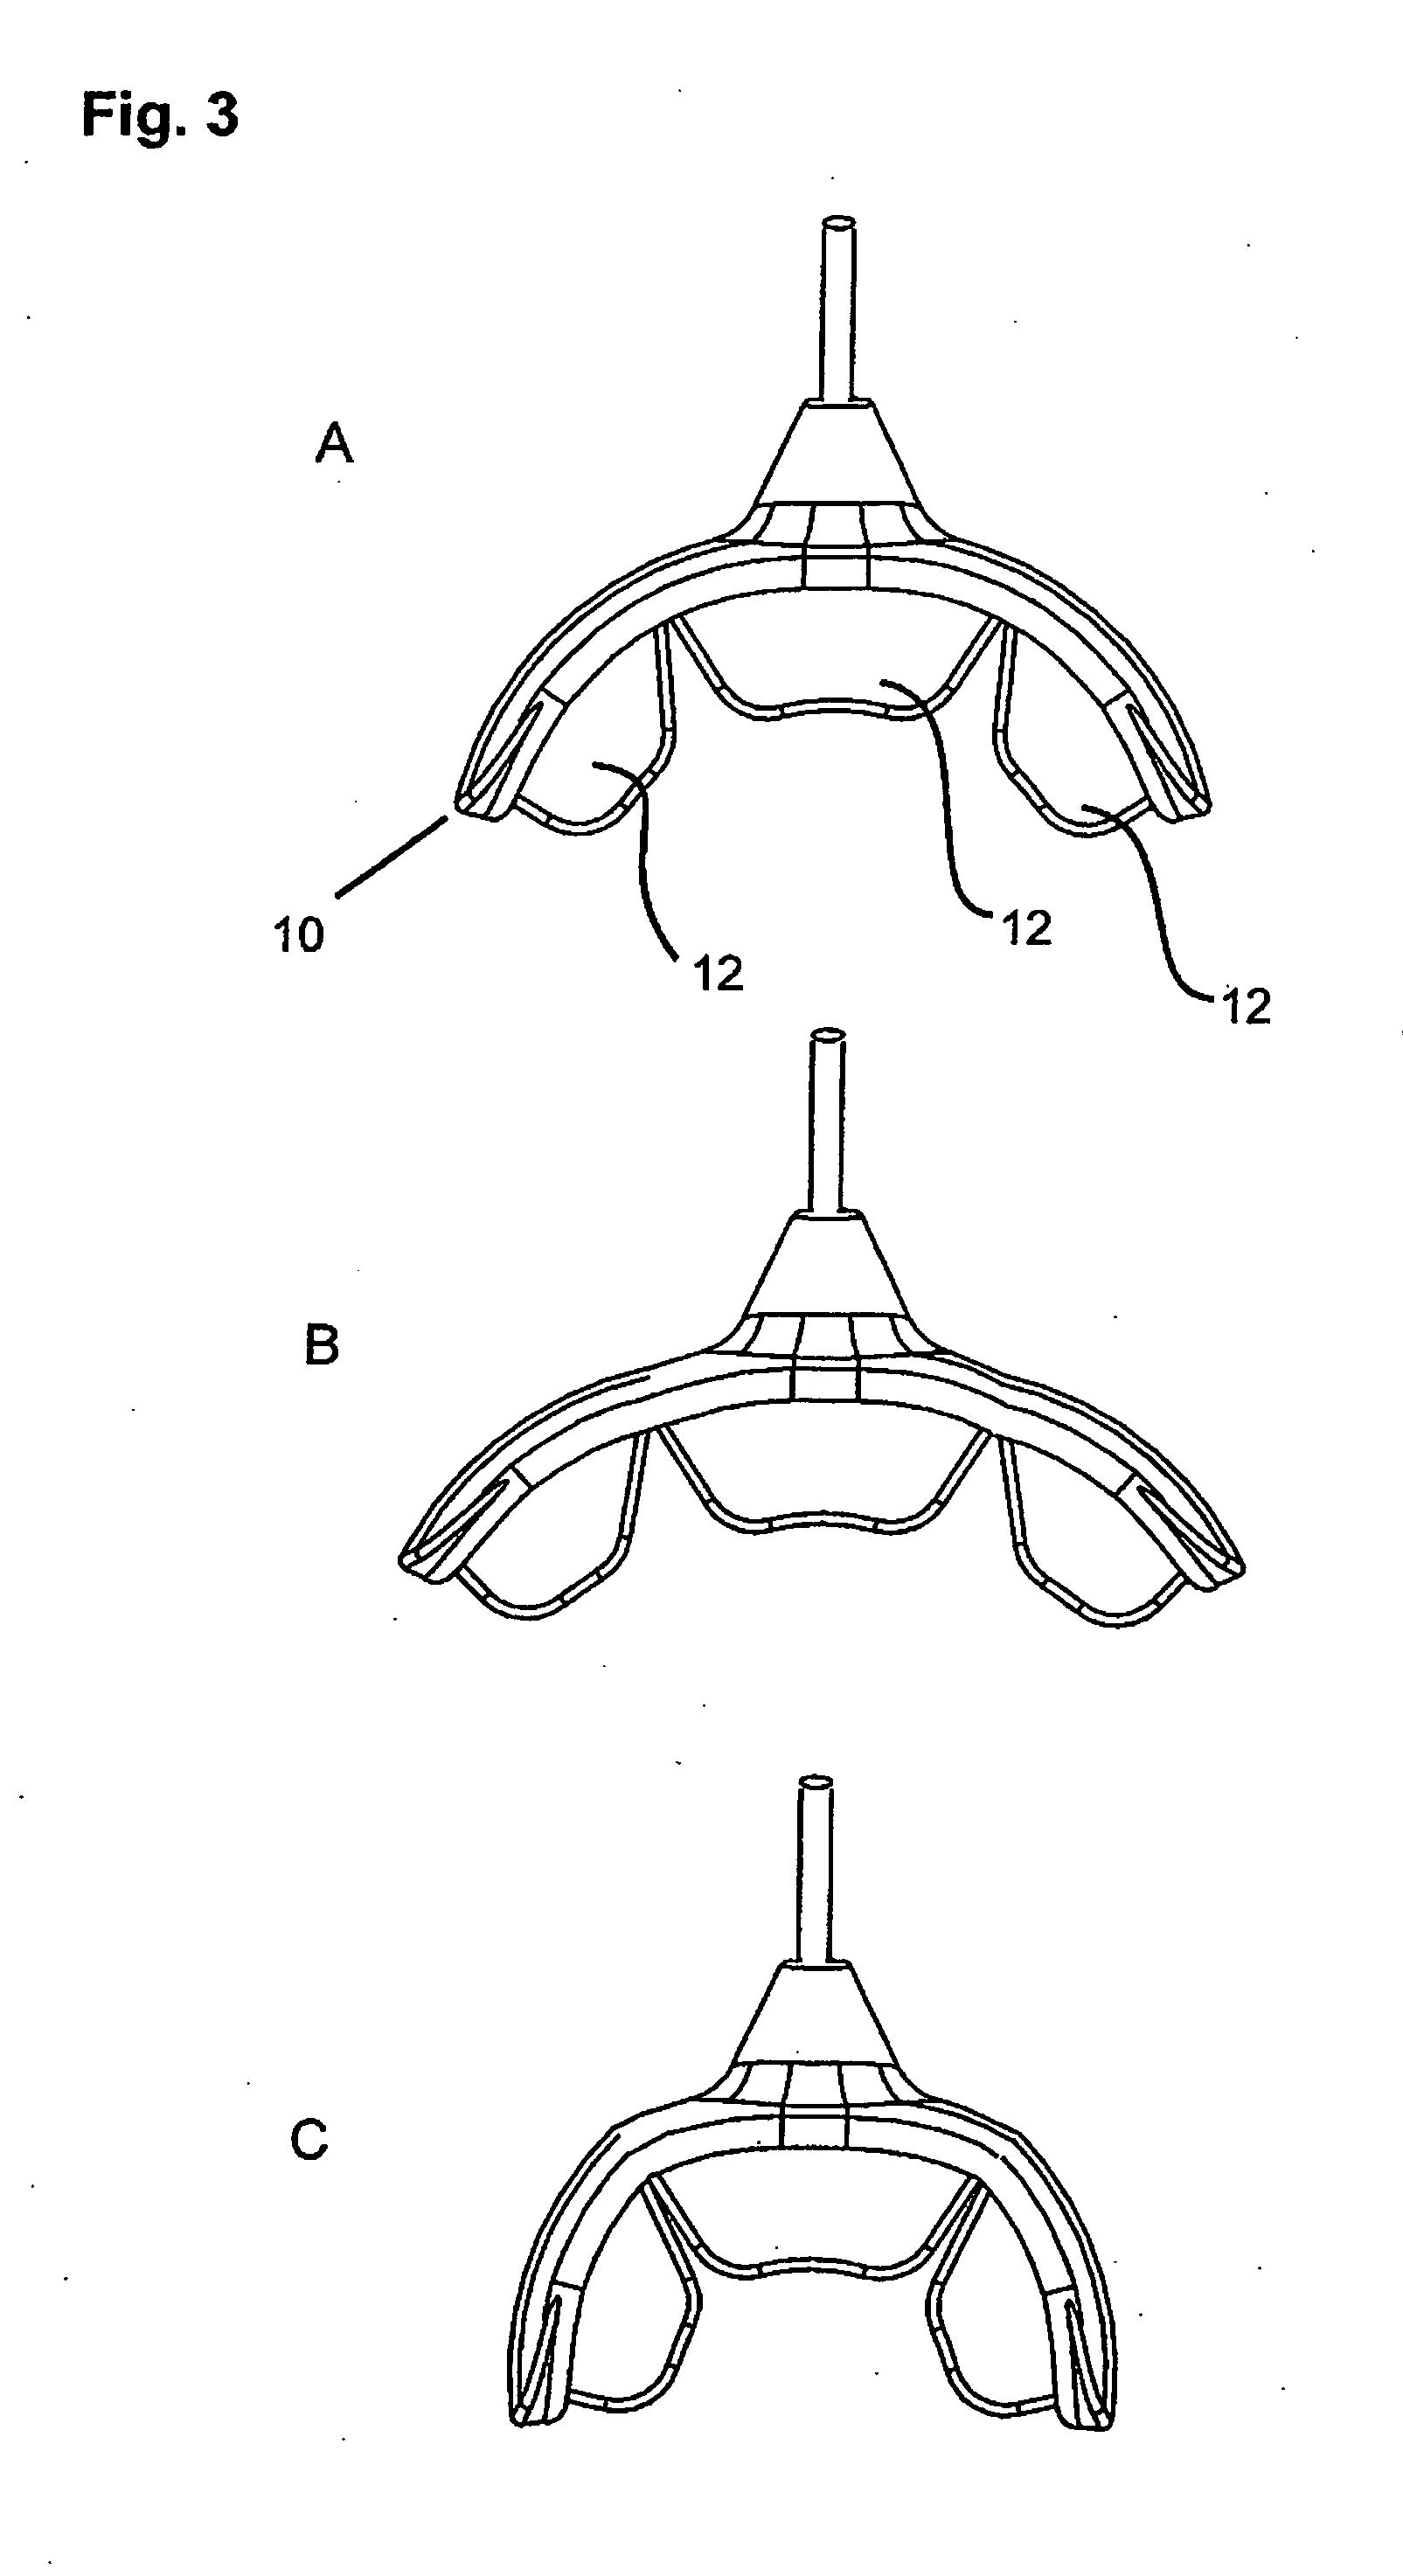 Mouthpiece that adjusts to user arch sizes and seals from oxygen exposure